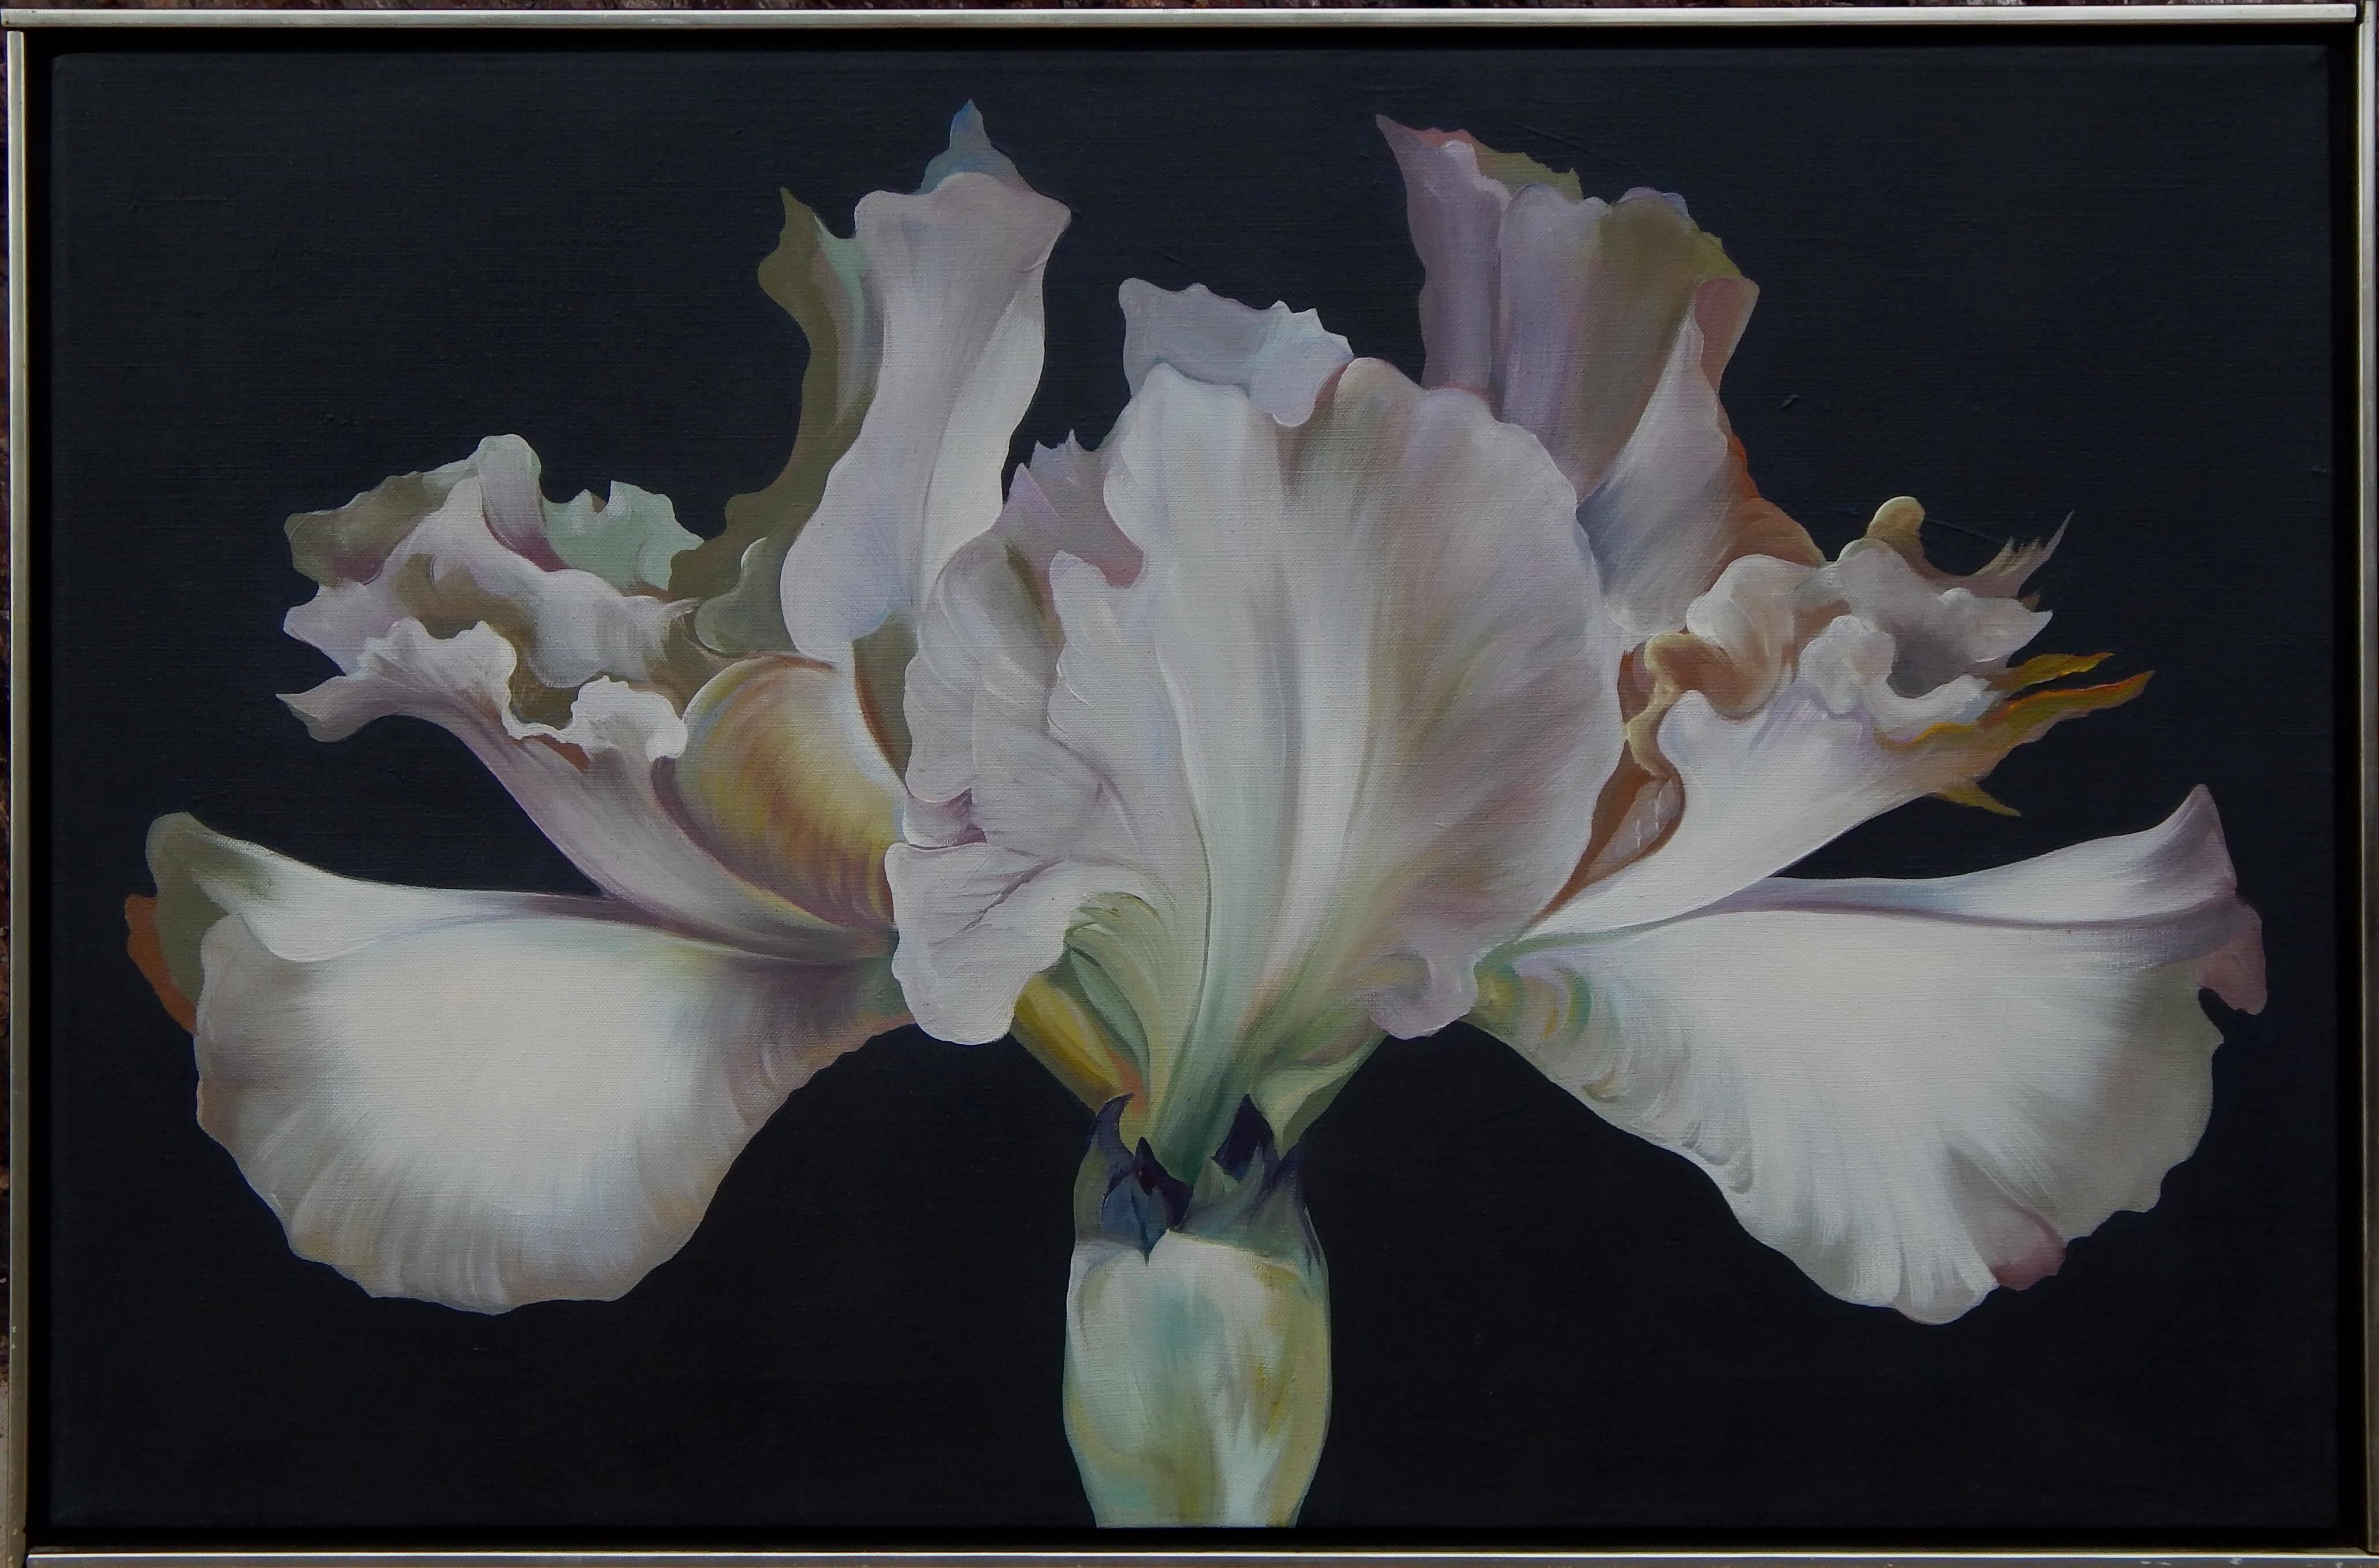 A beautiful example by well-known artist Lowell Nesbitt featuring dramatic pale Irises on a dark grey ground.
Image size: 22